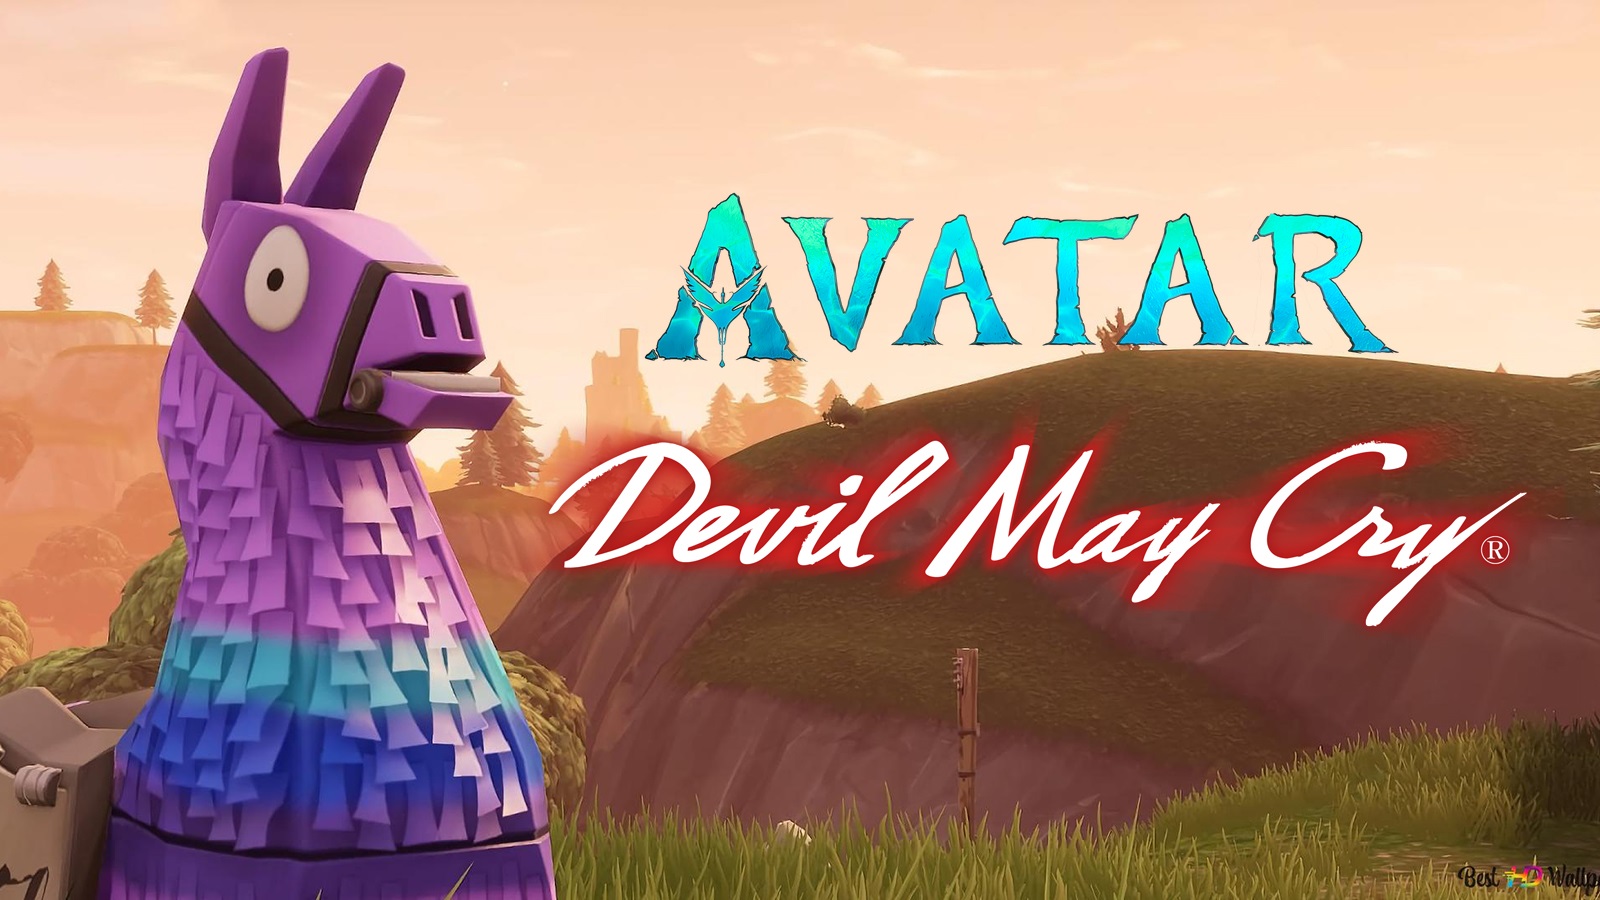 Fortnite leak reveals collaboration with Devil May Cry and Avatar